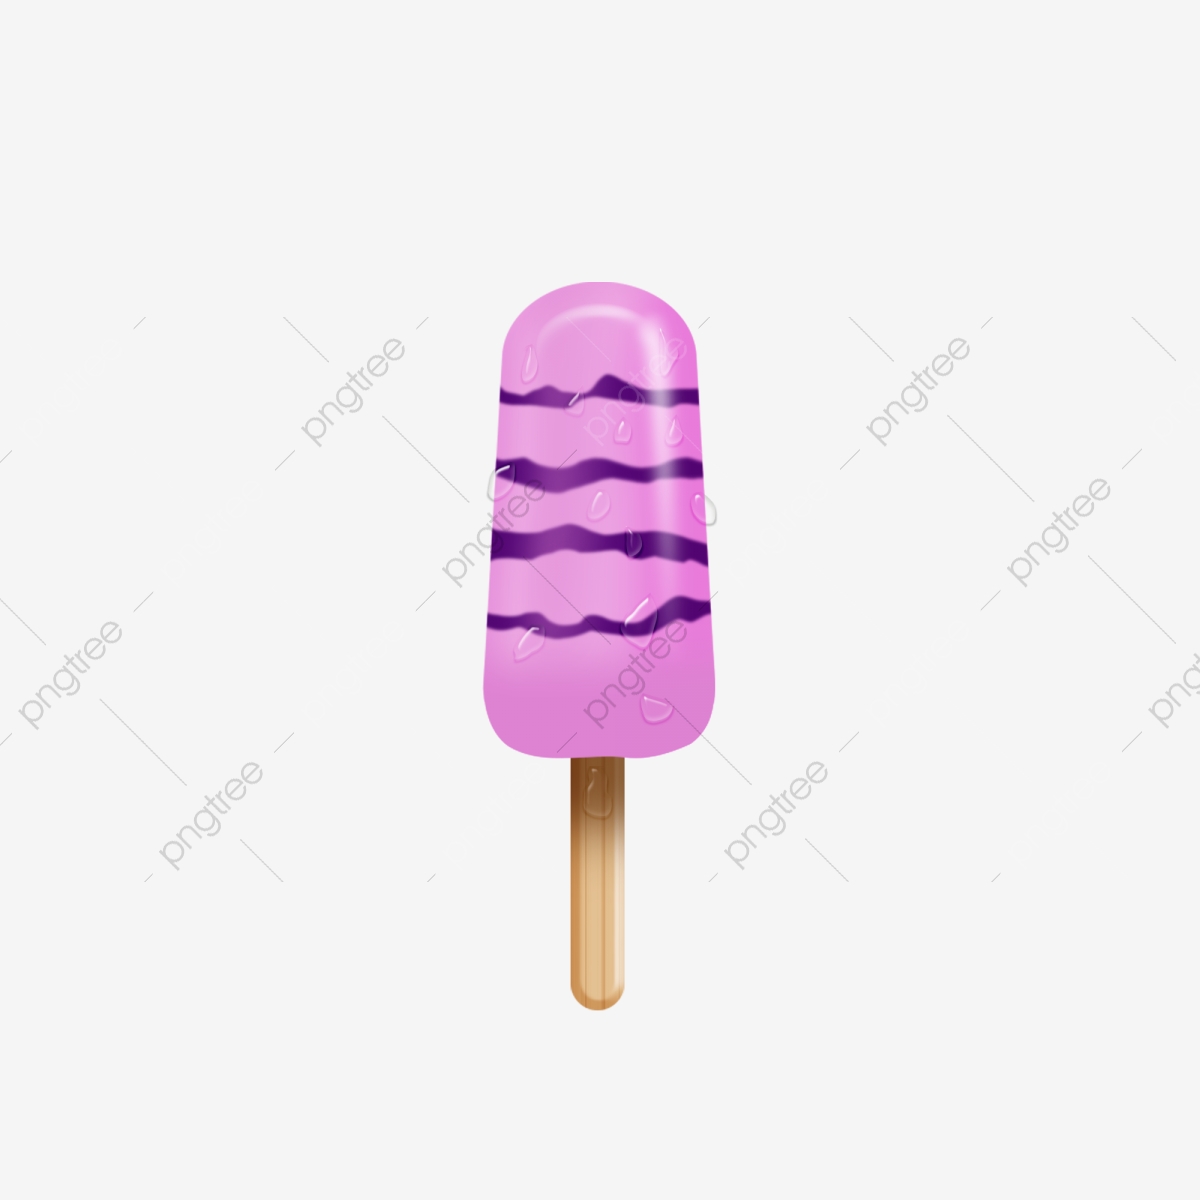 Blueberry clipart popsicle. Food element minimalist wind